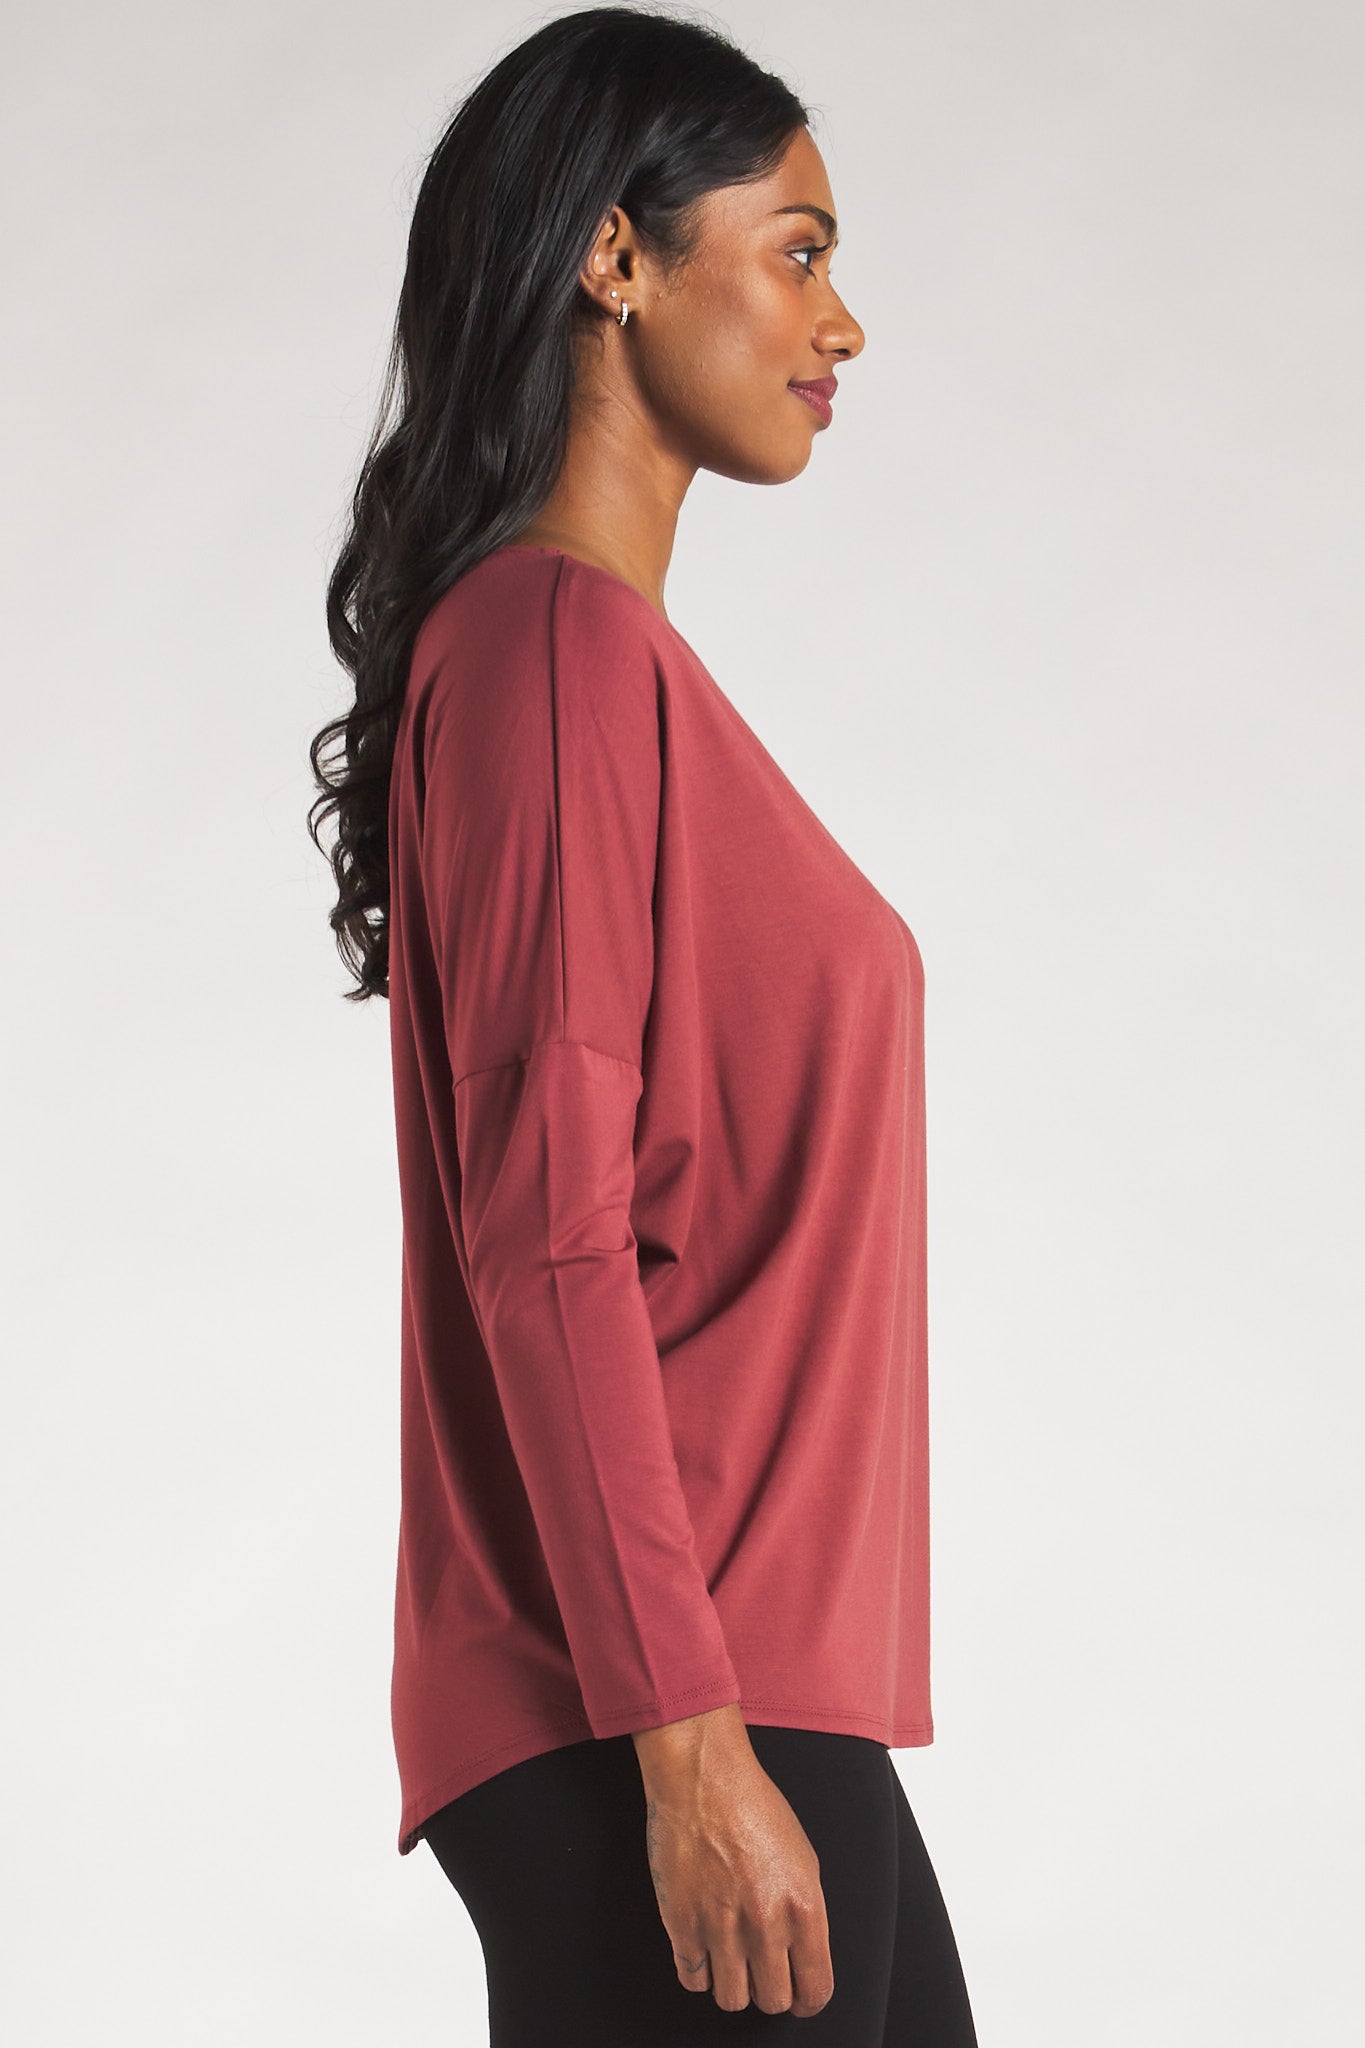 Side view of a woman styling a Rosewood long sleeve top by Terrera.